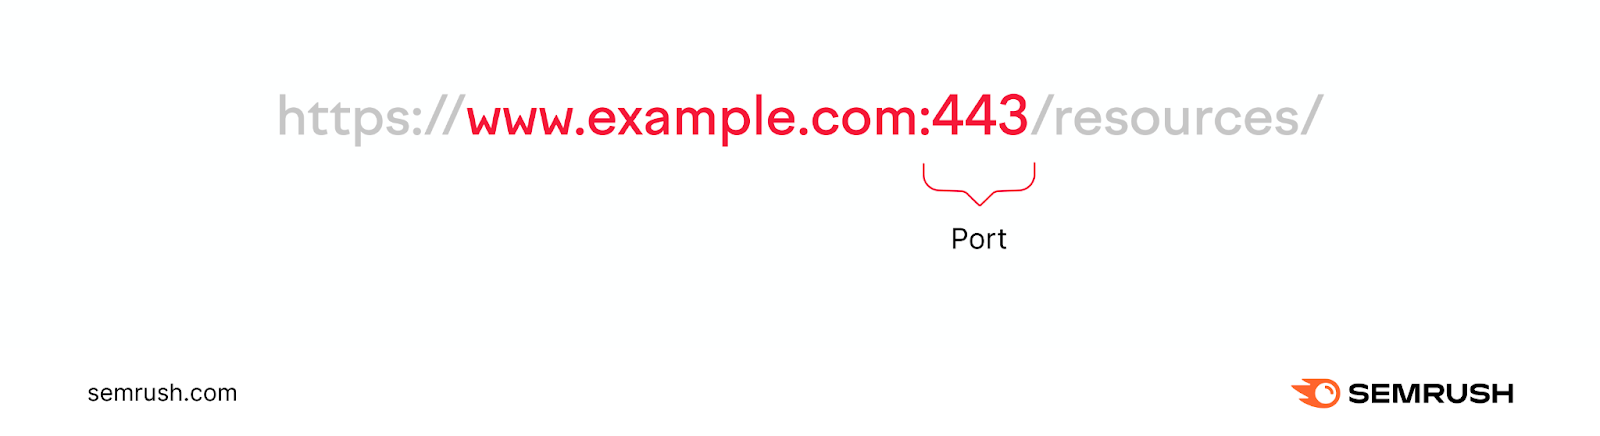 An URL with ":443" part marked as "port"